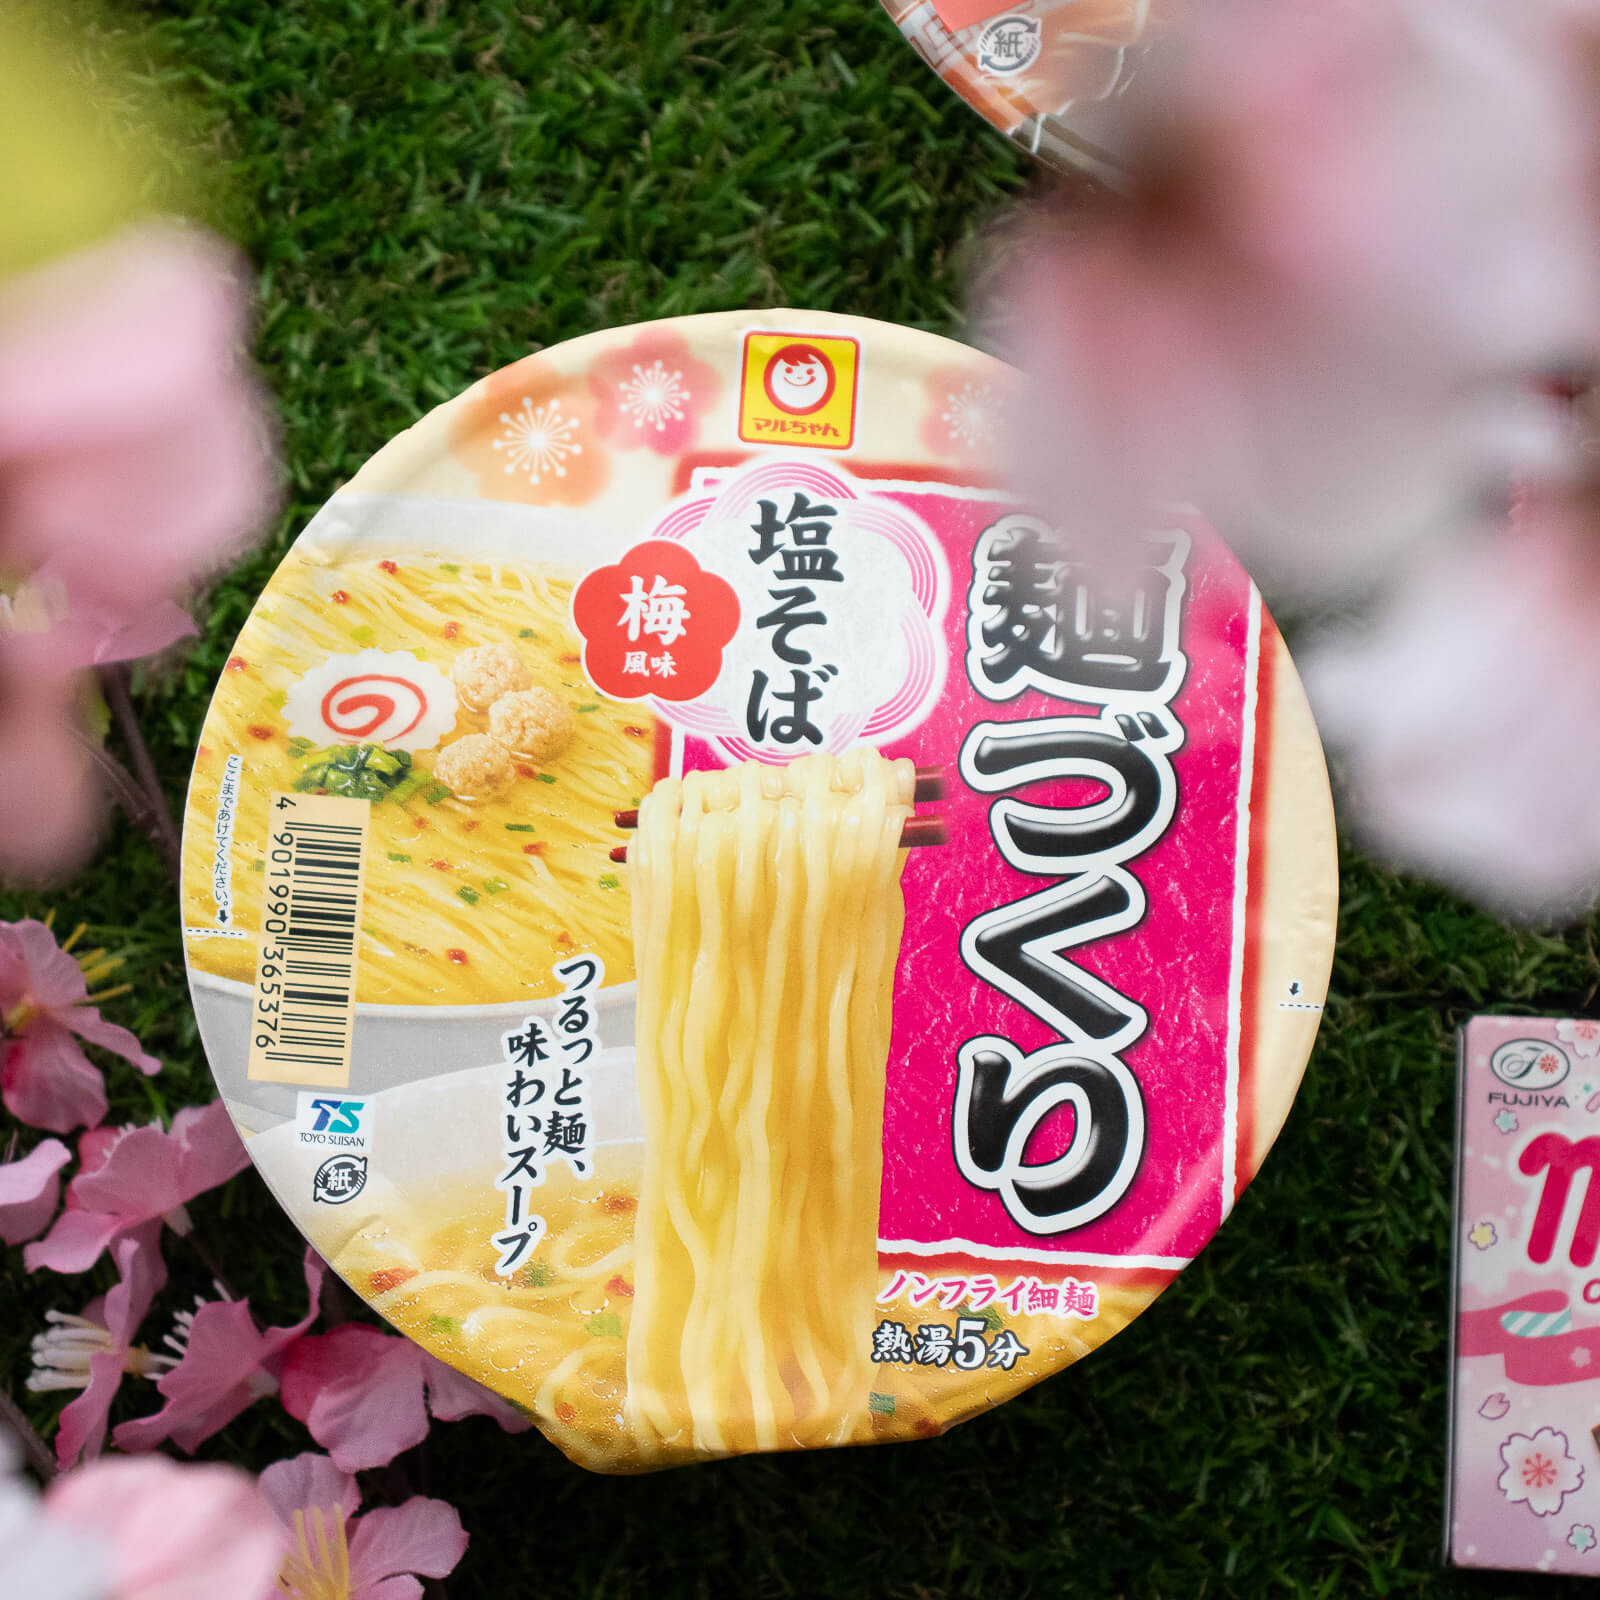 Ume Shio Soba, included in Sweets & Ramen Mix Pack